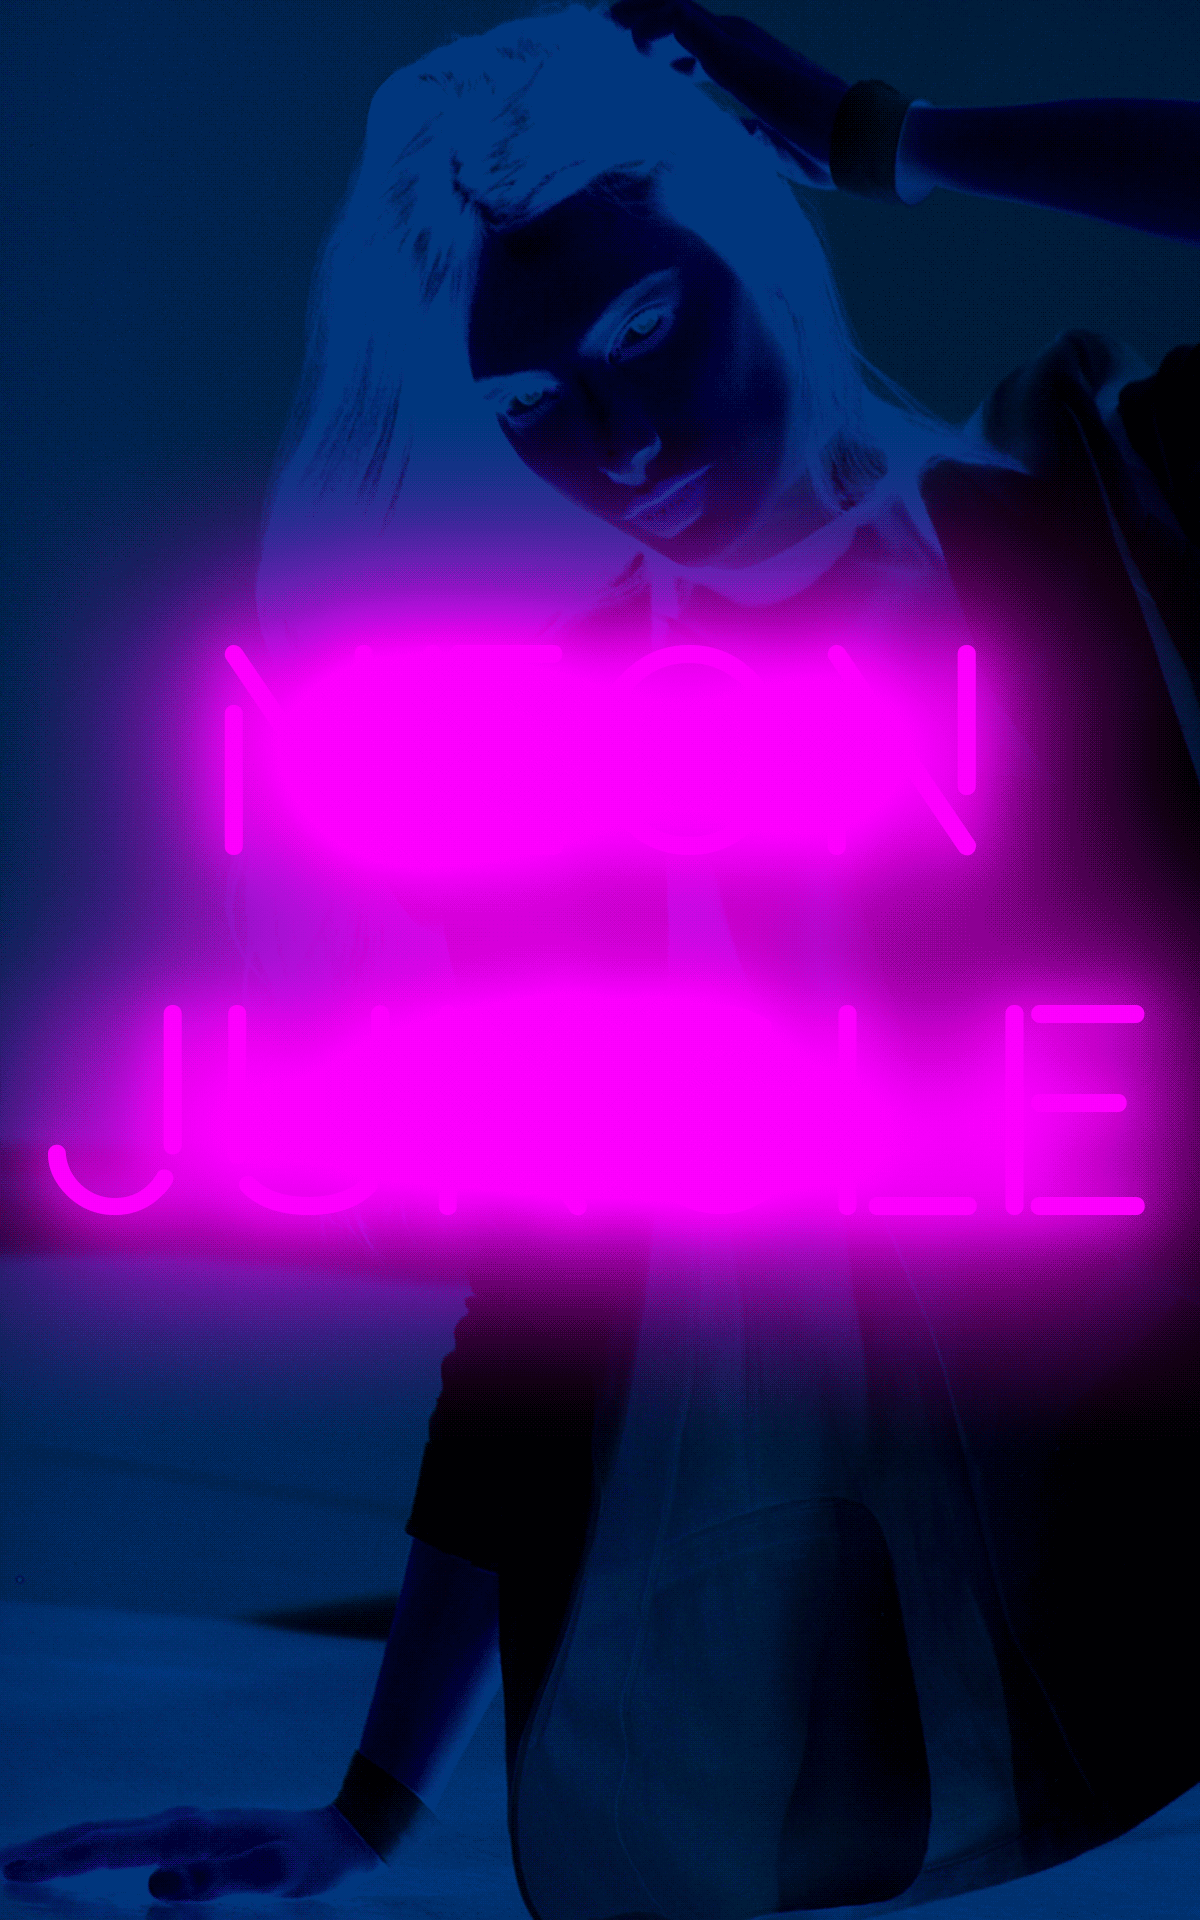 Aesthetic 80s Neon GIF Find On GIFER